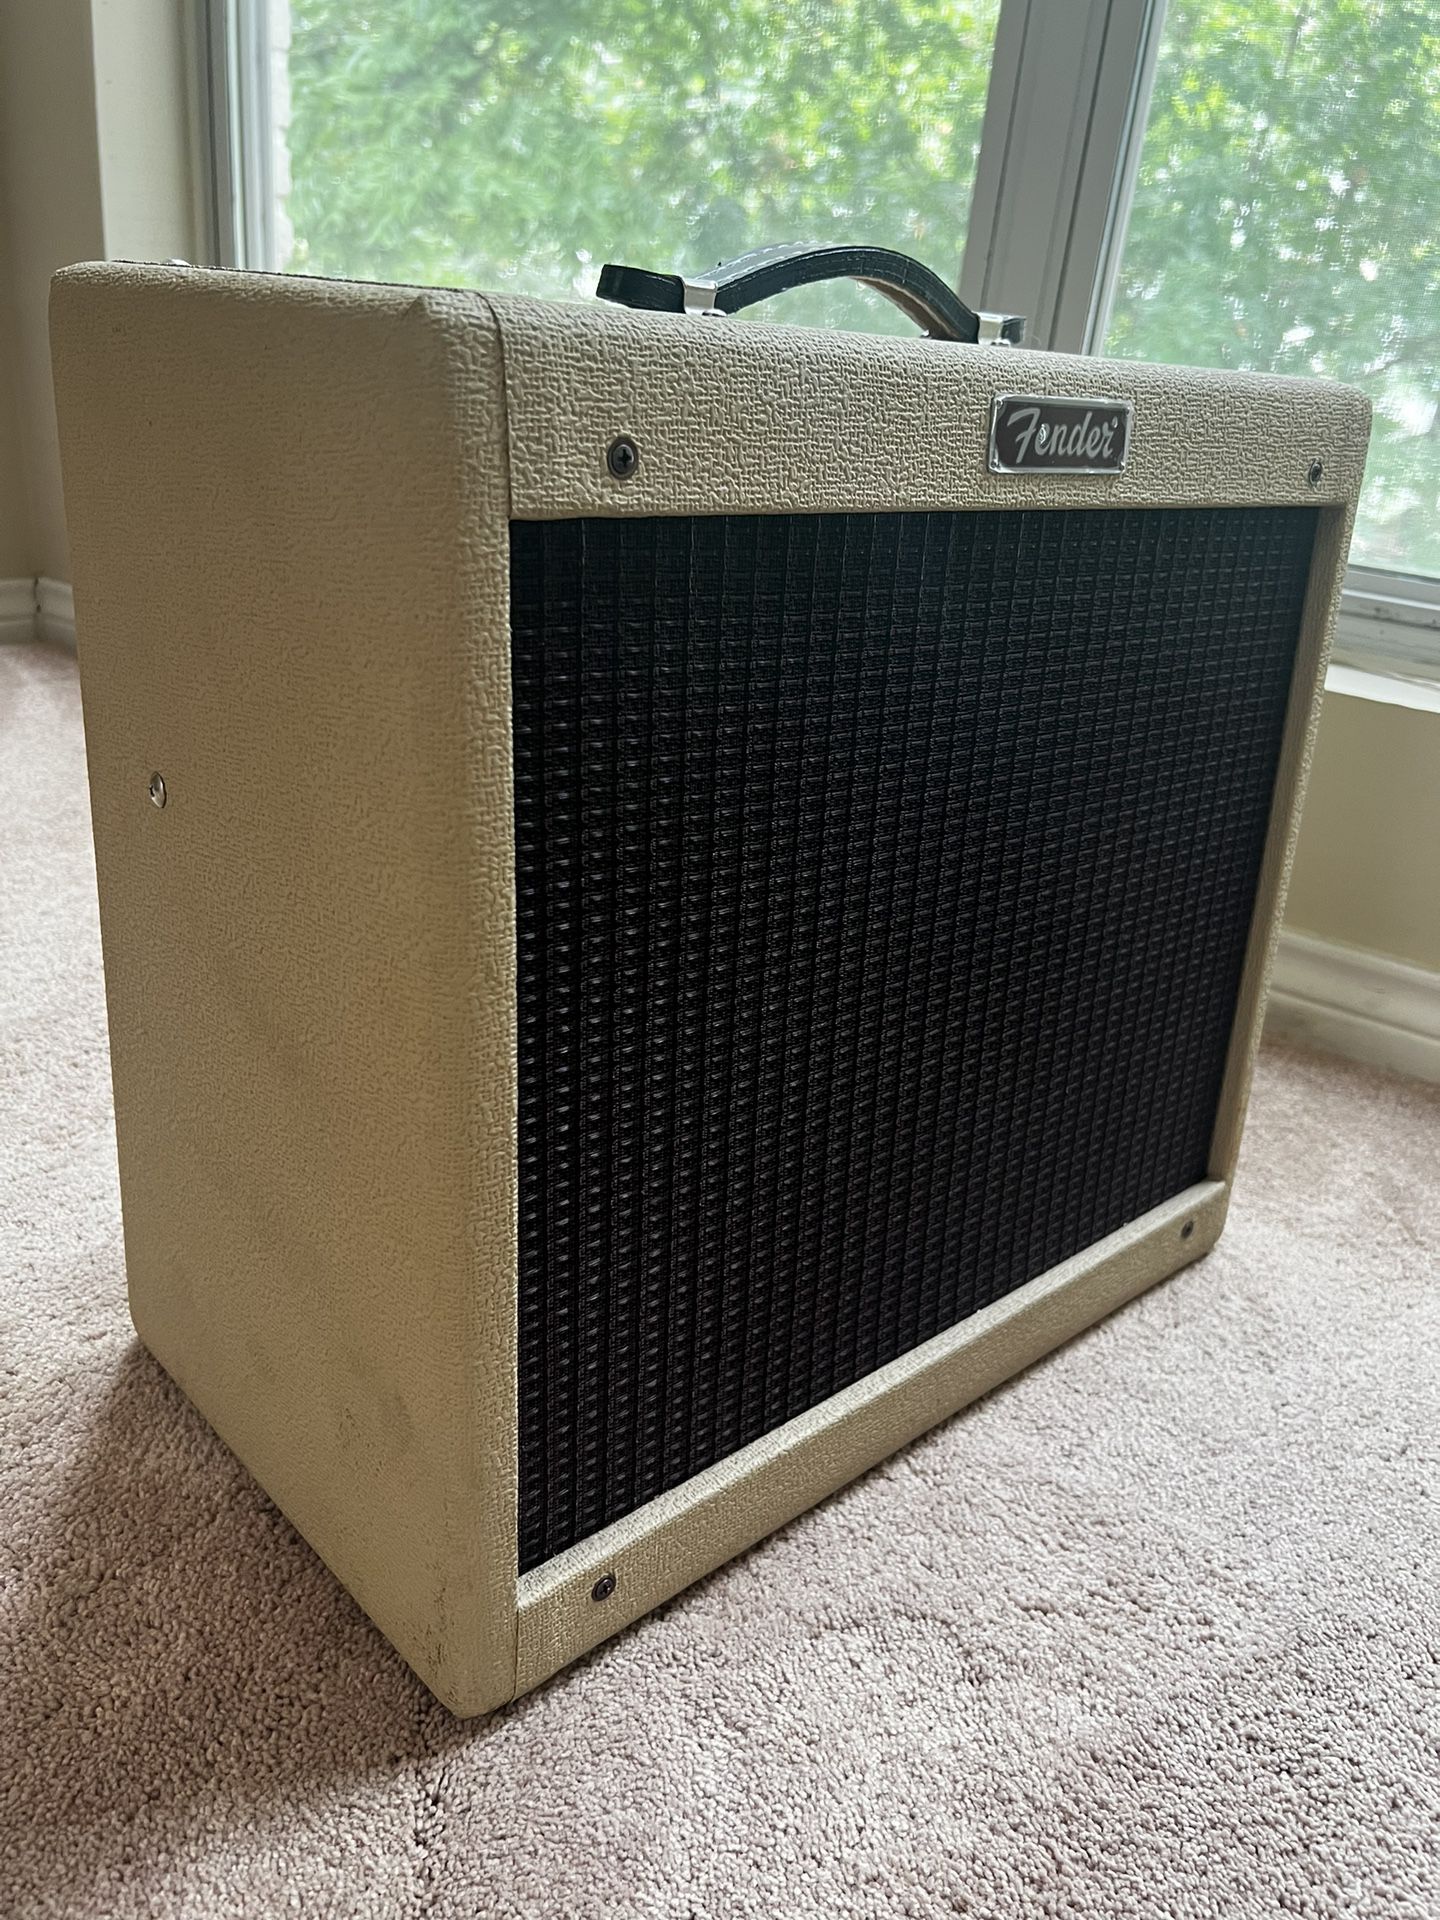 Fender Blues Junior 15W 1x12” Guitar Tube Amp Made in USA